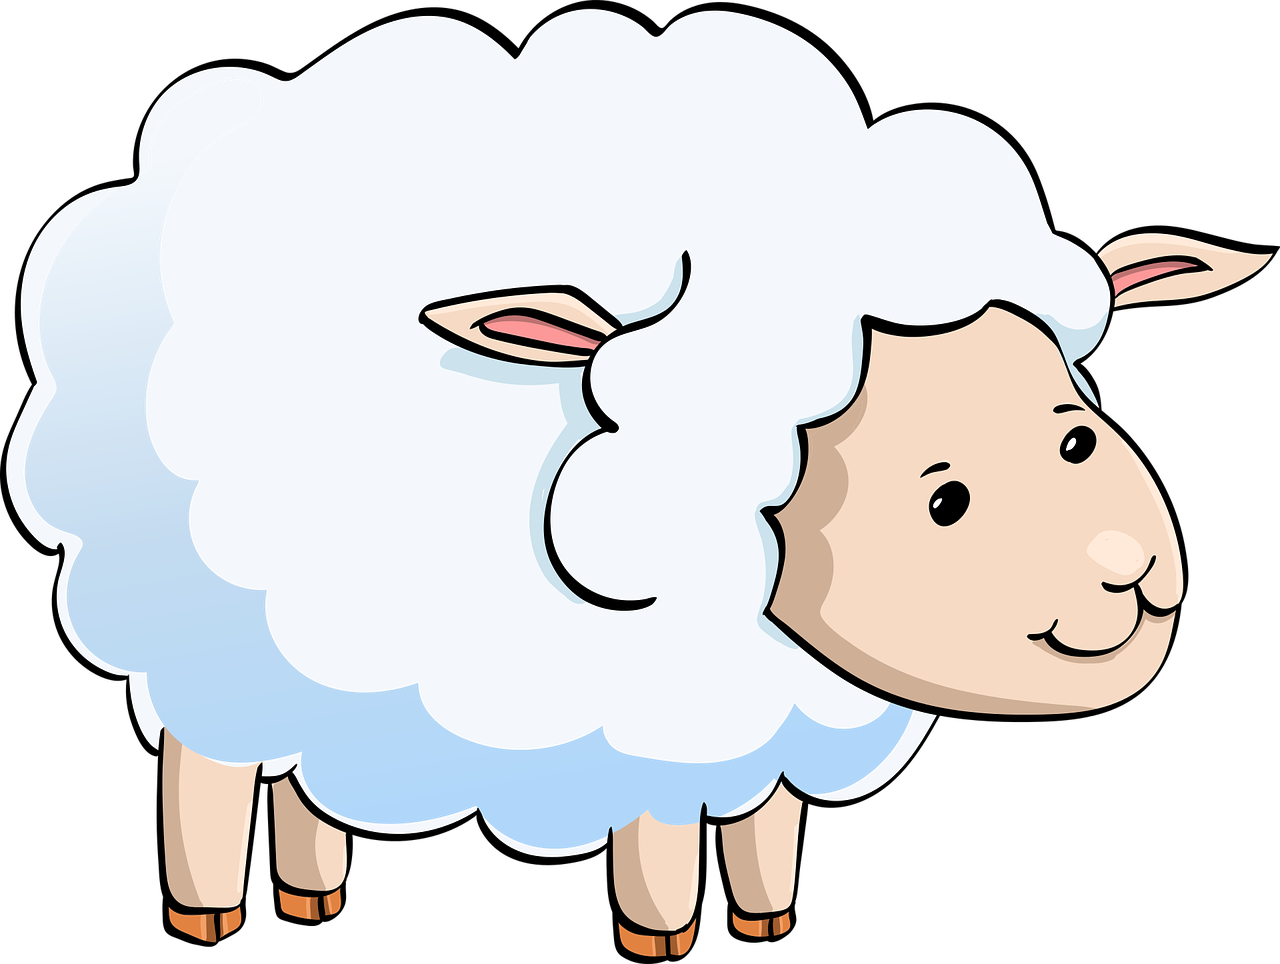 a close up of a sheep's face on a black background, a digital rendering, shutterstock, mingei, simple cartoon style, little bo peep, slightly turned to the right, on